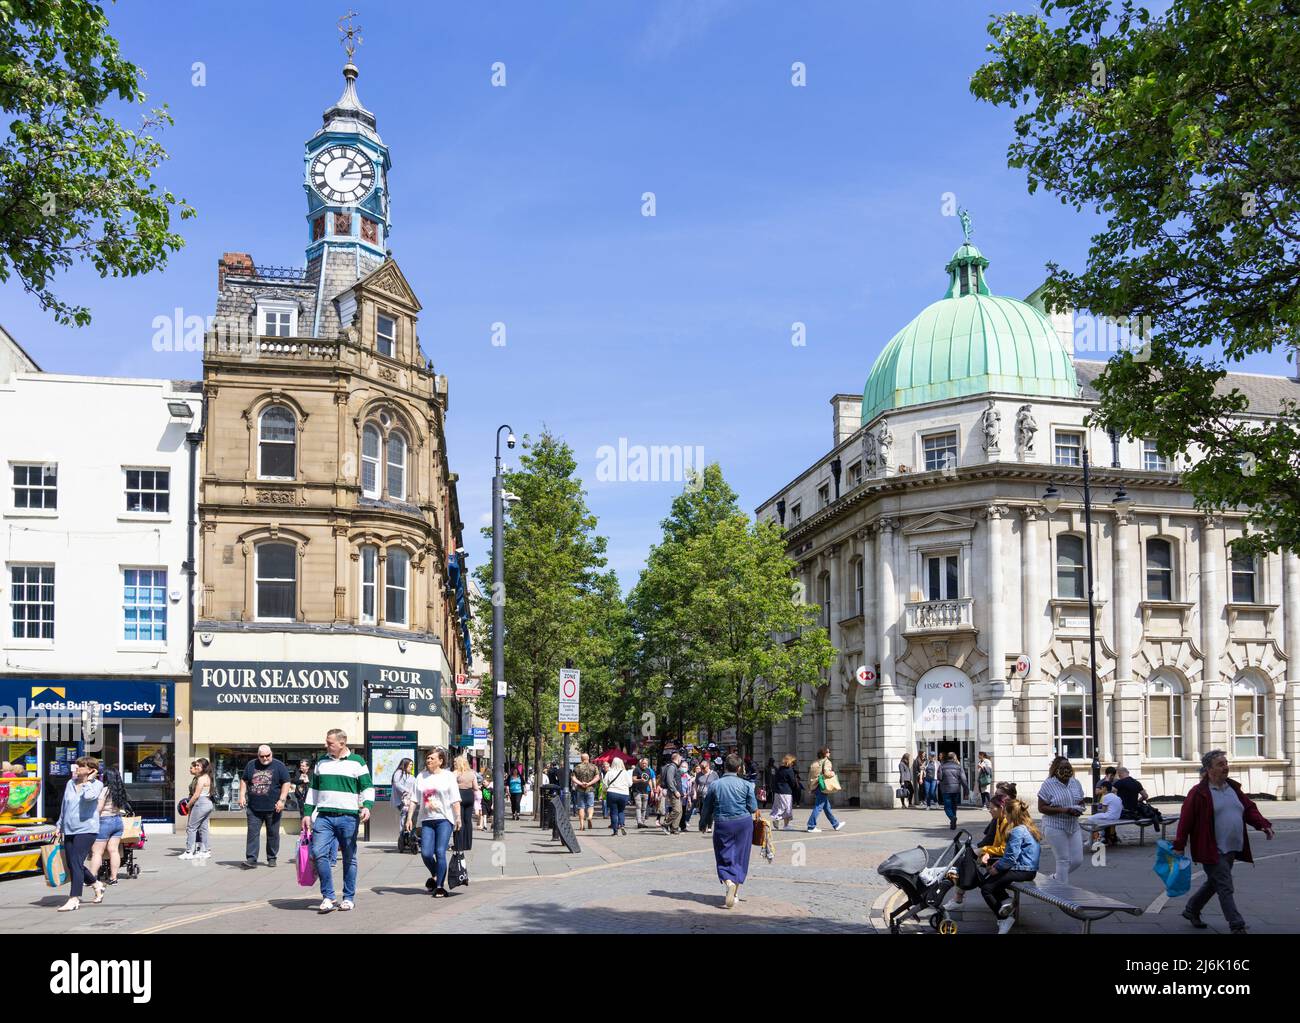 Doncaster town centre and shoppers on the High street and St Sepulchre Gate in the town centre of Doncaster South Yorkshire England  UK GB Europe Stock Photo